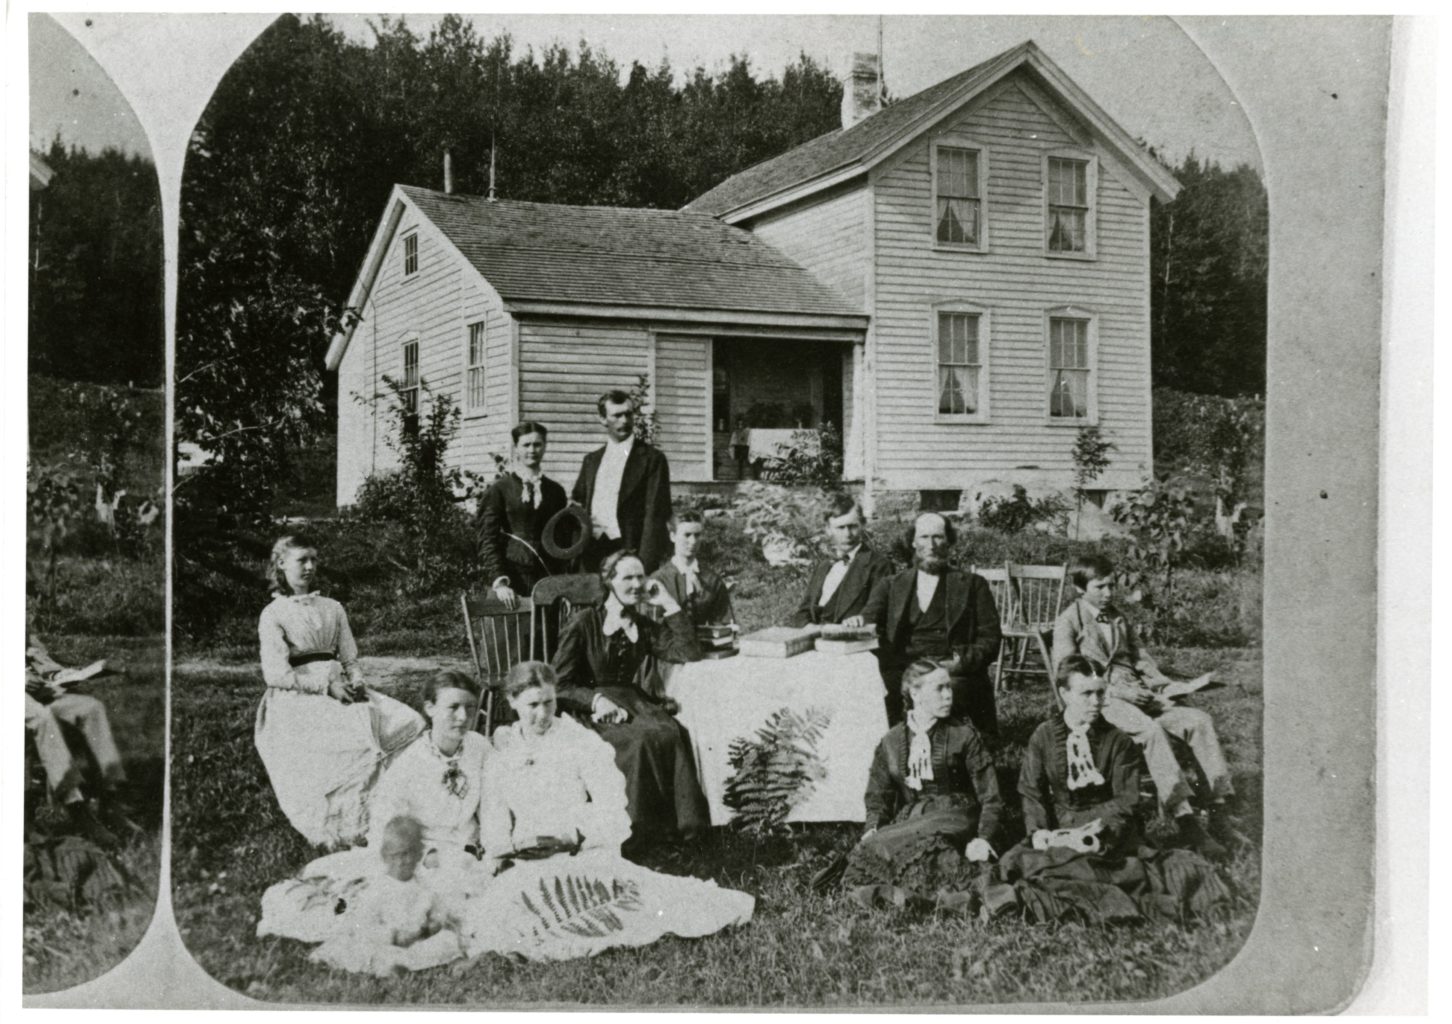 A family sits outside with books.